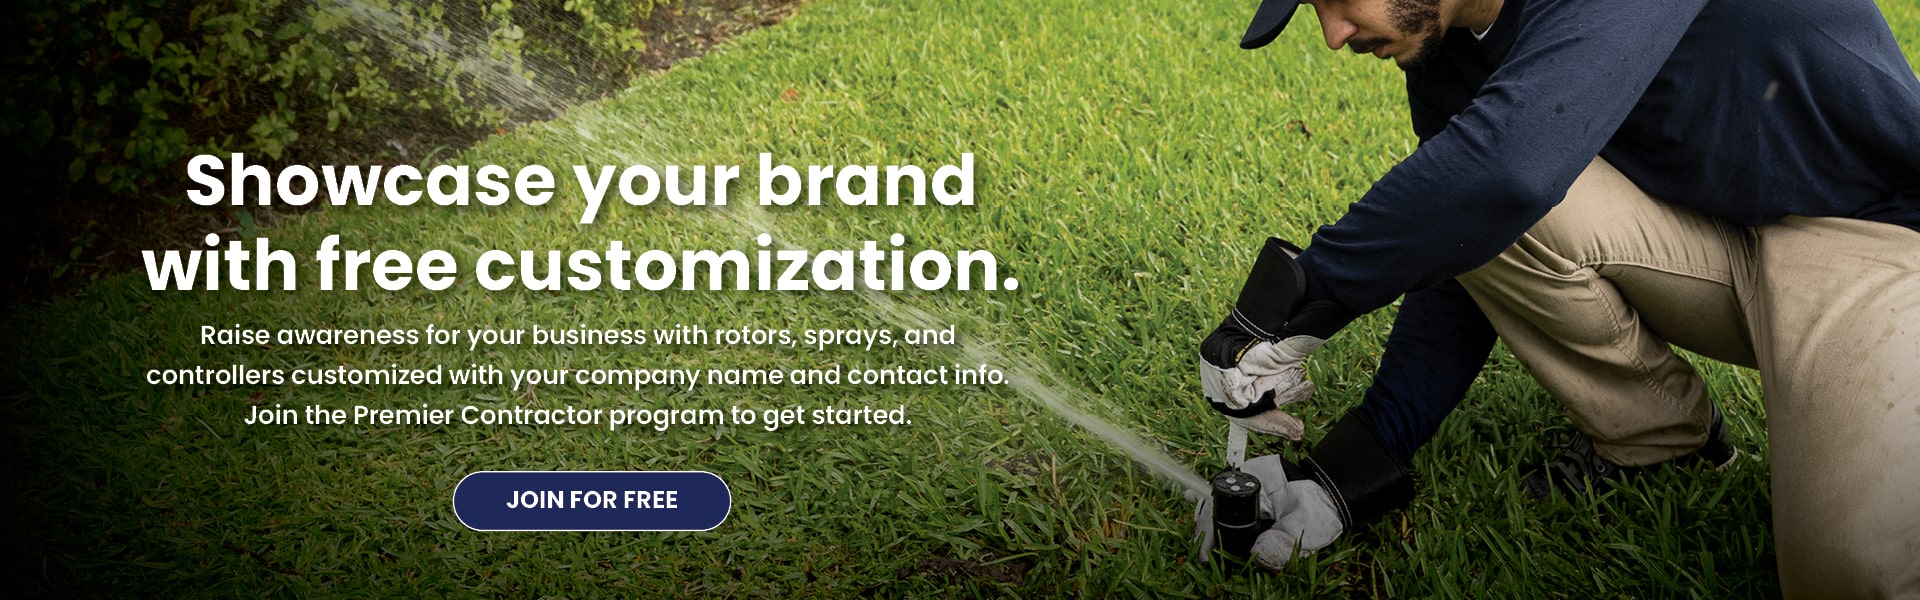 Join the Premier Contractor Program for benefits such as custom irrigation products.